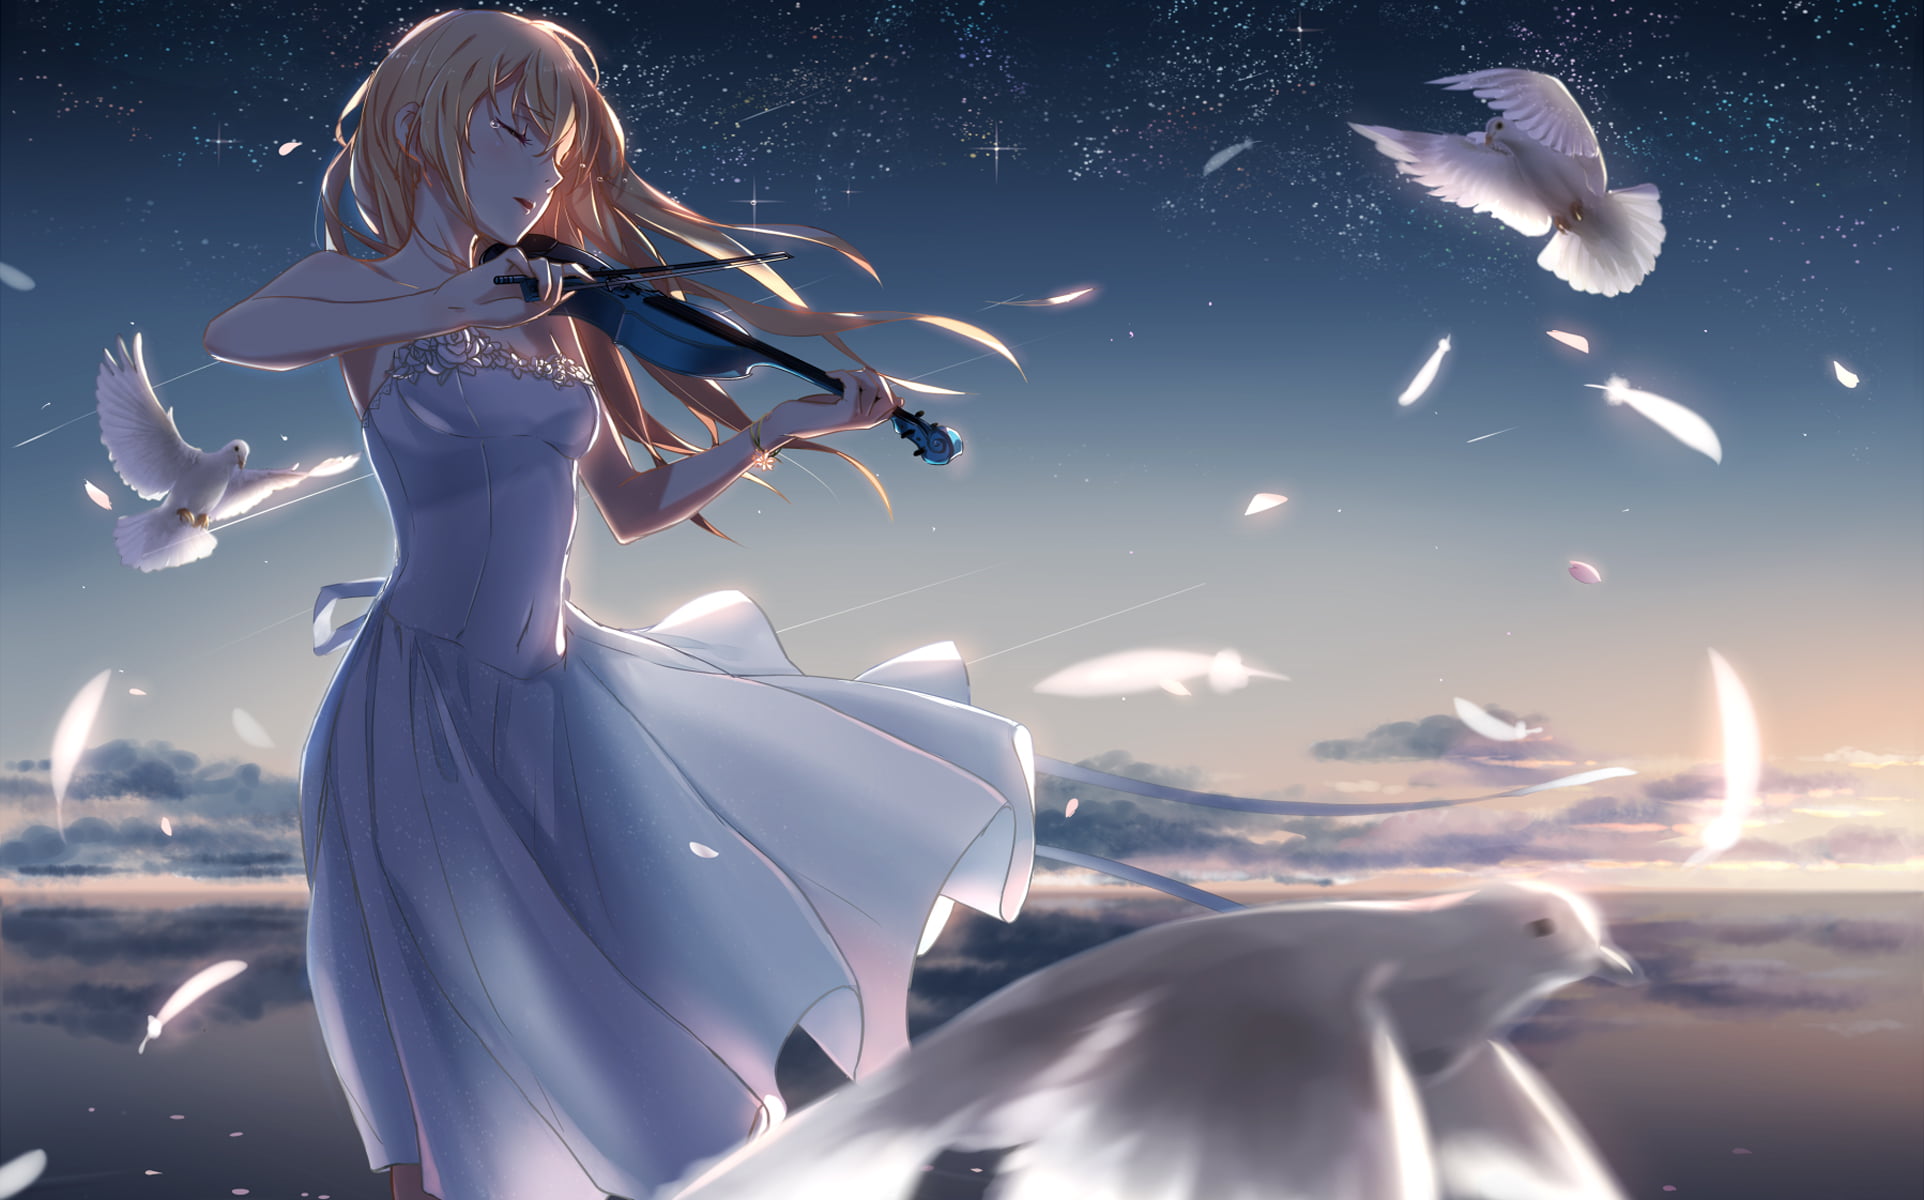 Your Lie in April anime HD wallpaper